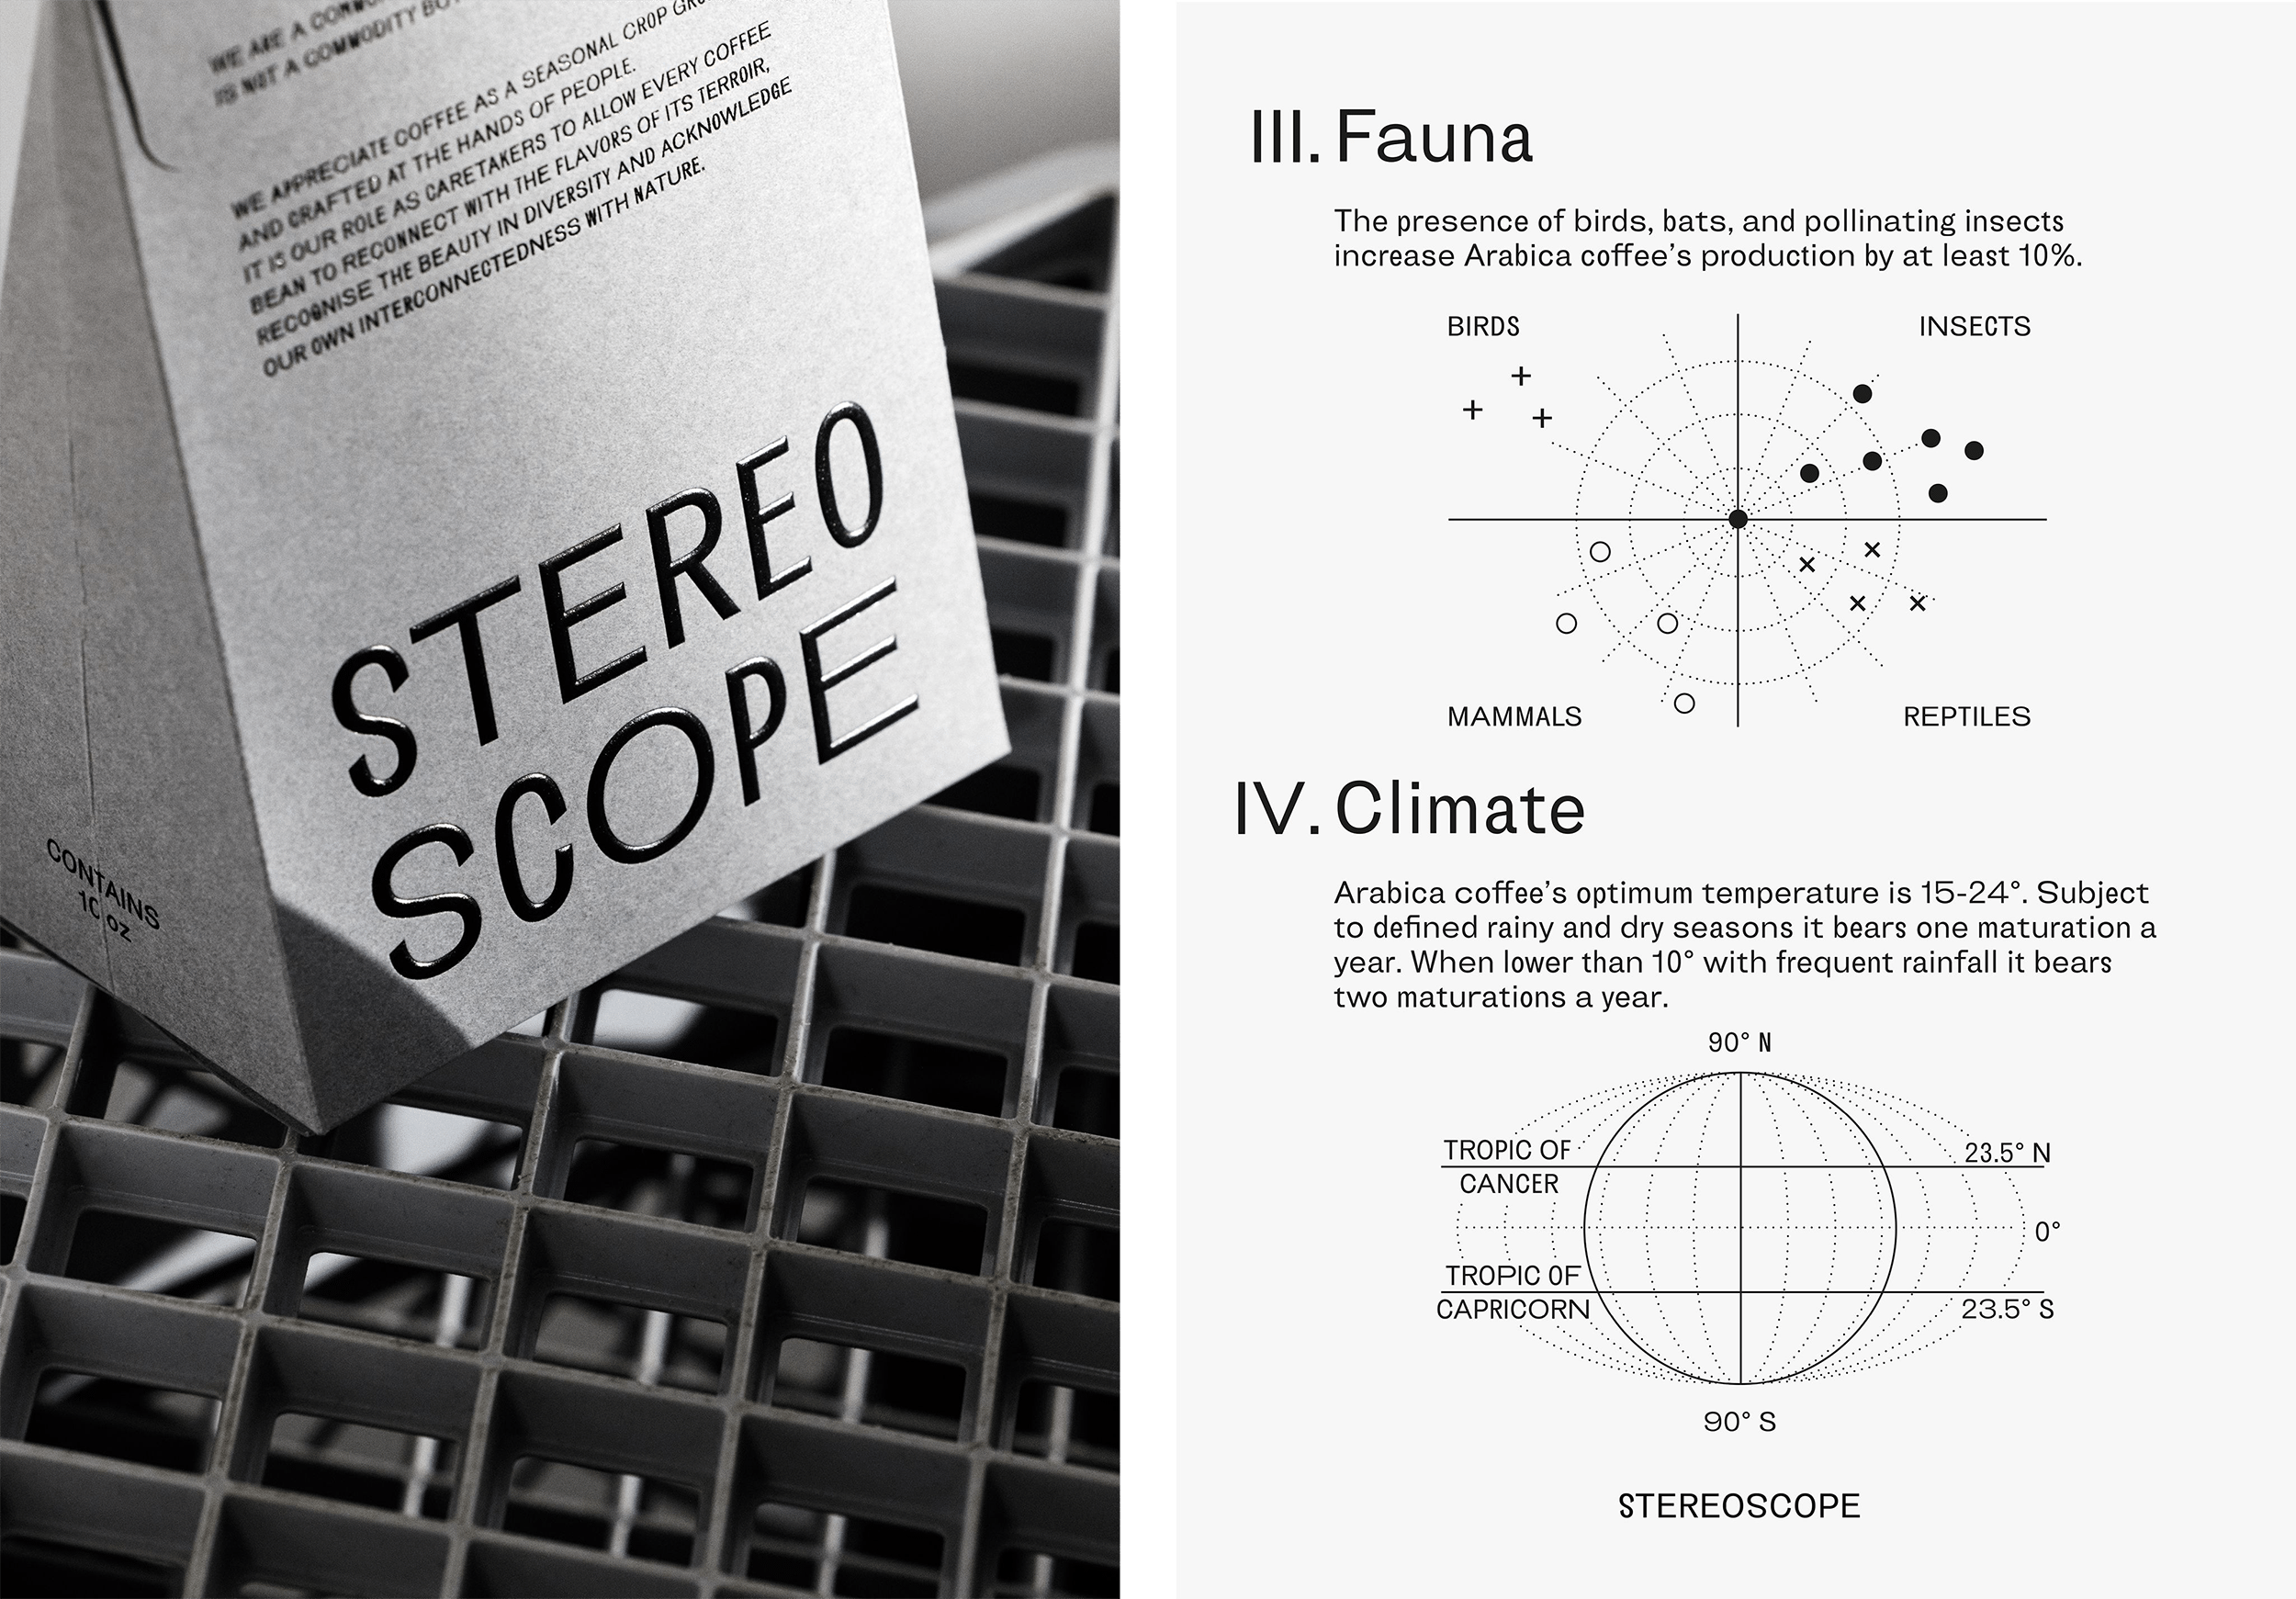 New brand identity and custom packaging design by Olssøn Barbieri for speciality coffee copmany Stereoscope